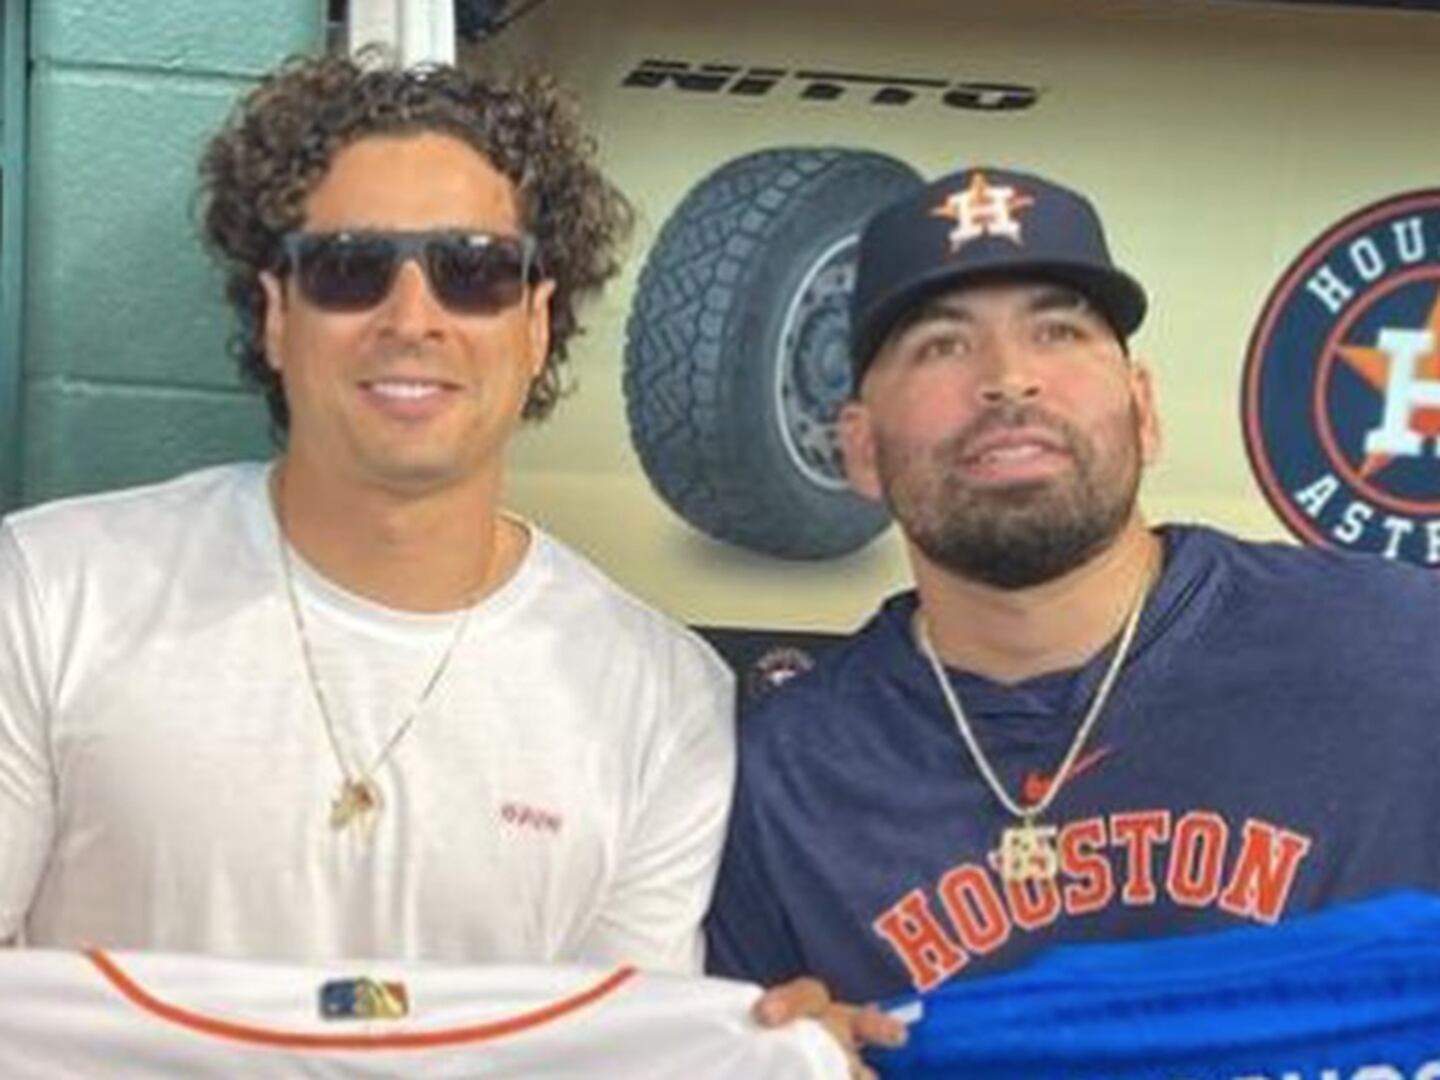 Memo Ochoa was a special guest at tonight's Houston Astros game